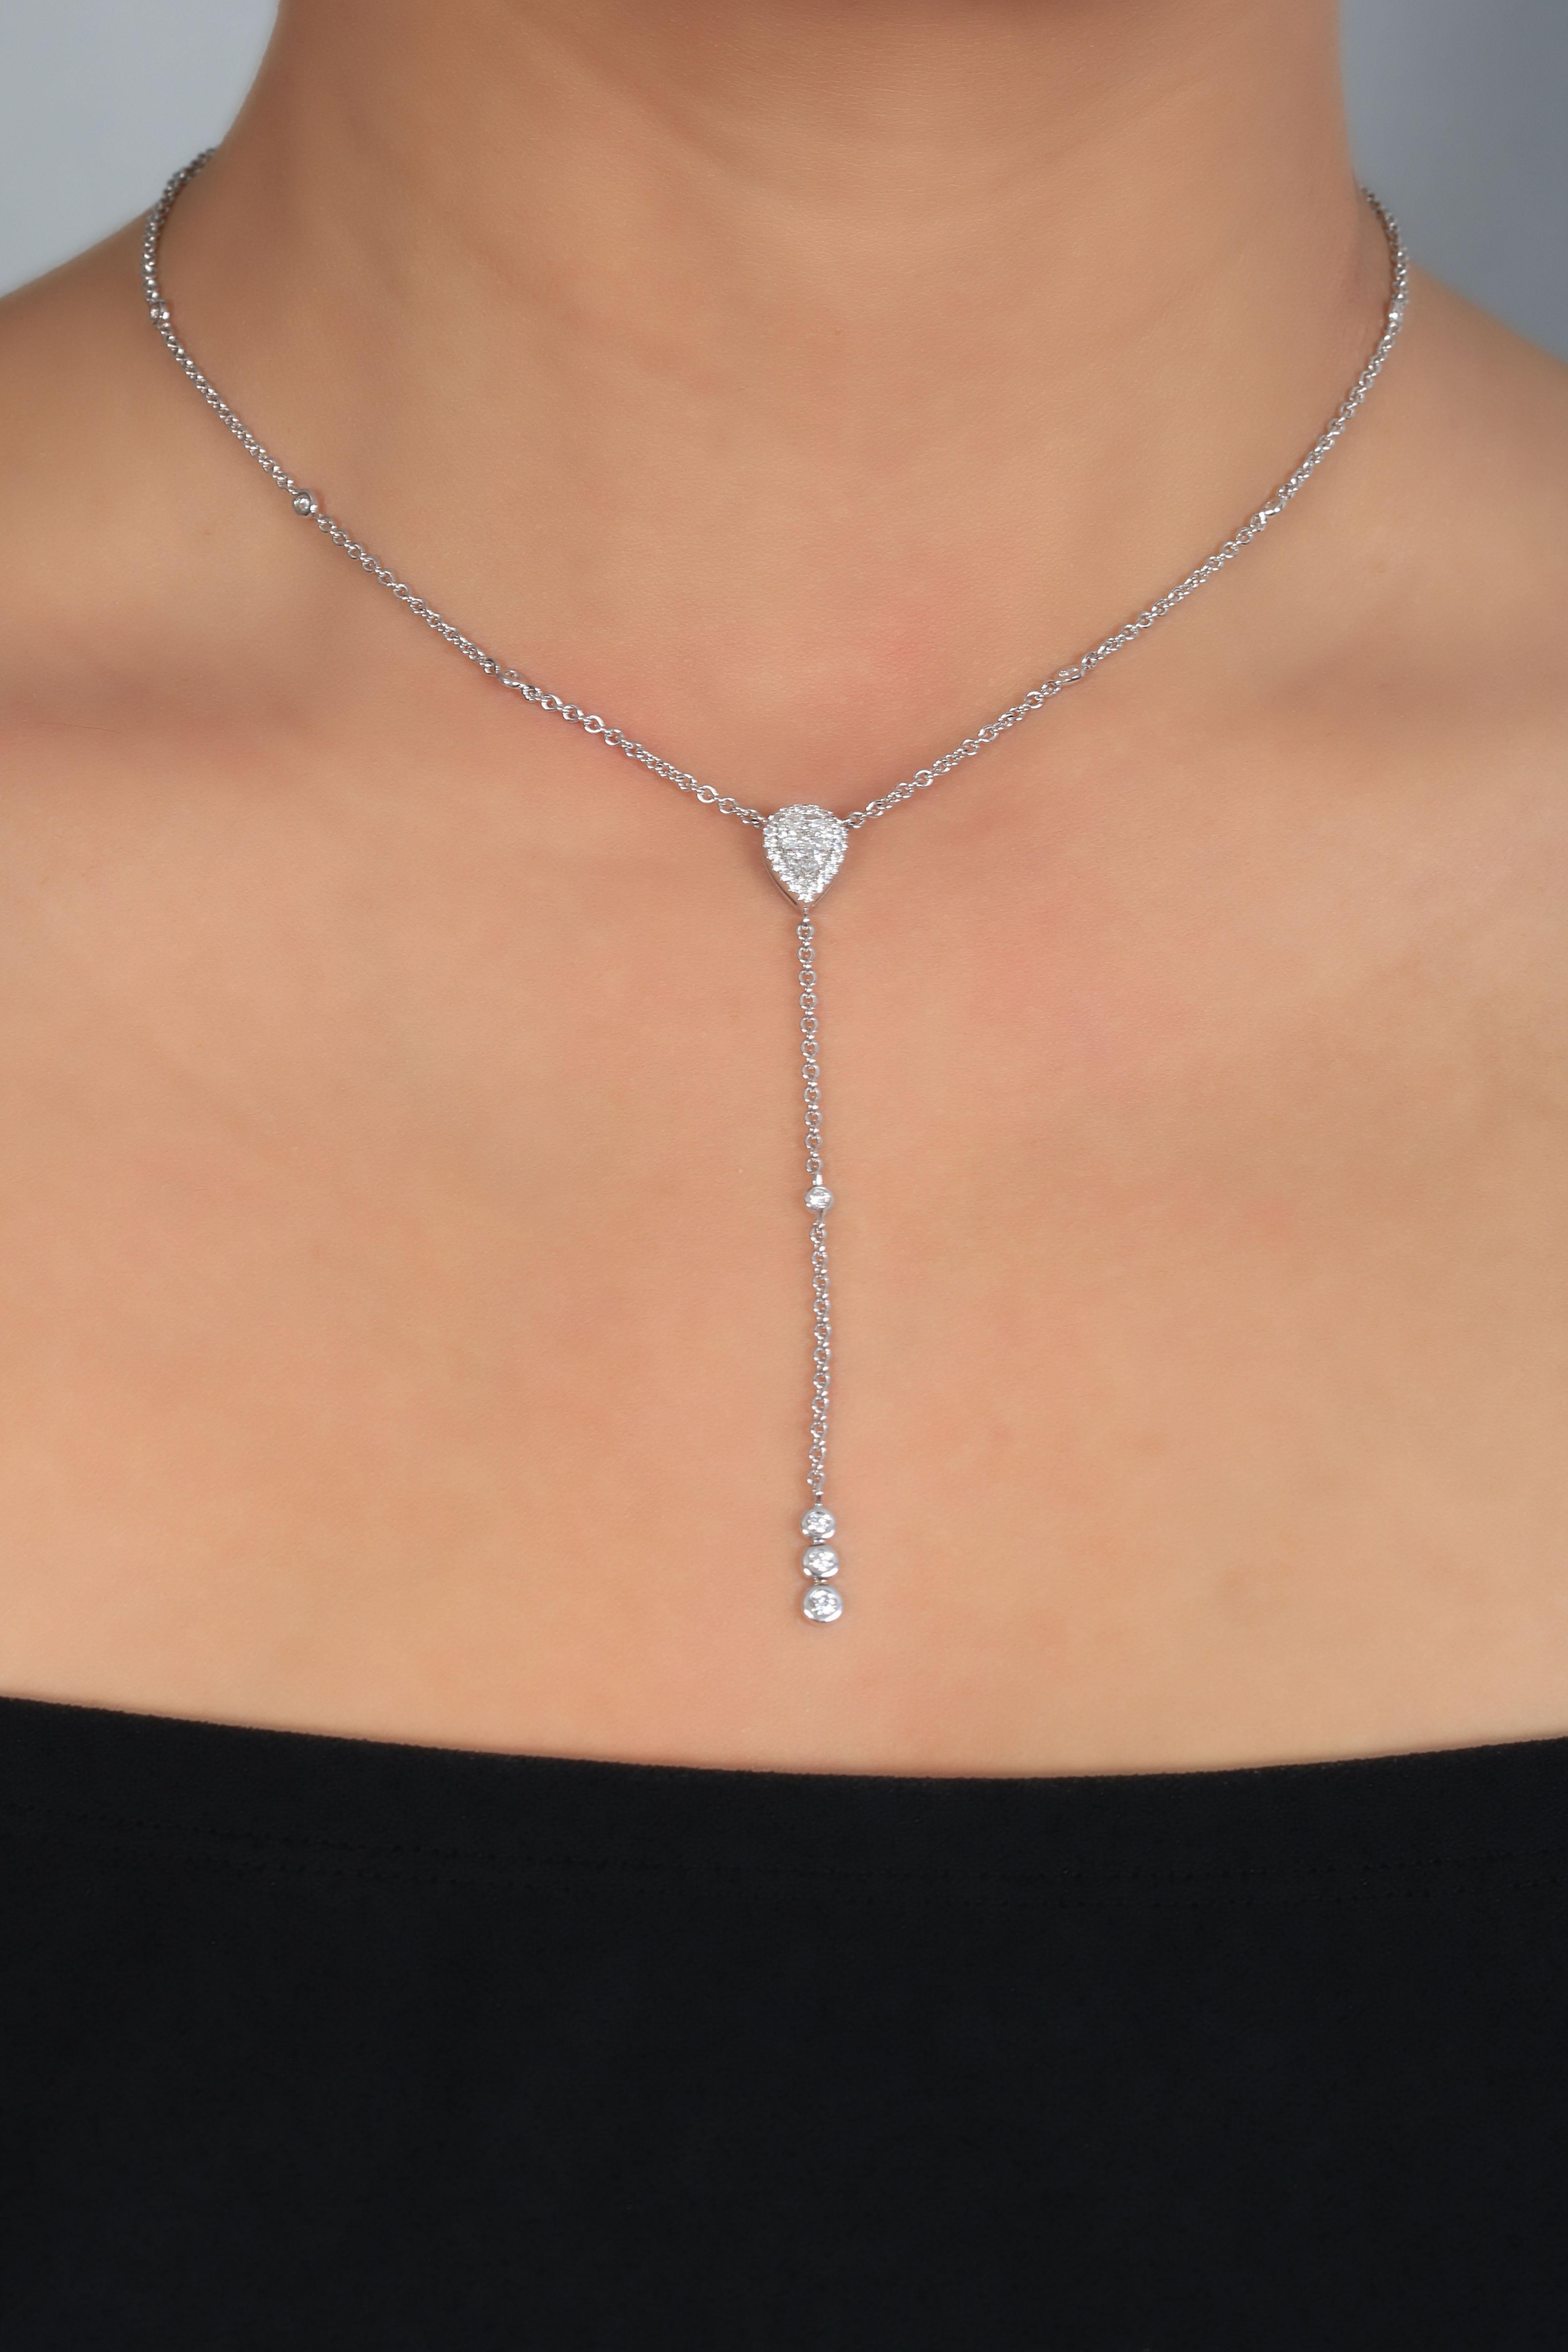 Simple and classic white gold necklace made by Amwaj, with a mix of pear and Marquise shape of diamond that are making an illusion of one big solitaire pear shape surrounded by a diamond halo. Because of its simplicity it is a perfect choice for any